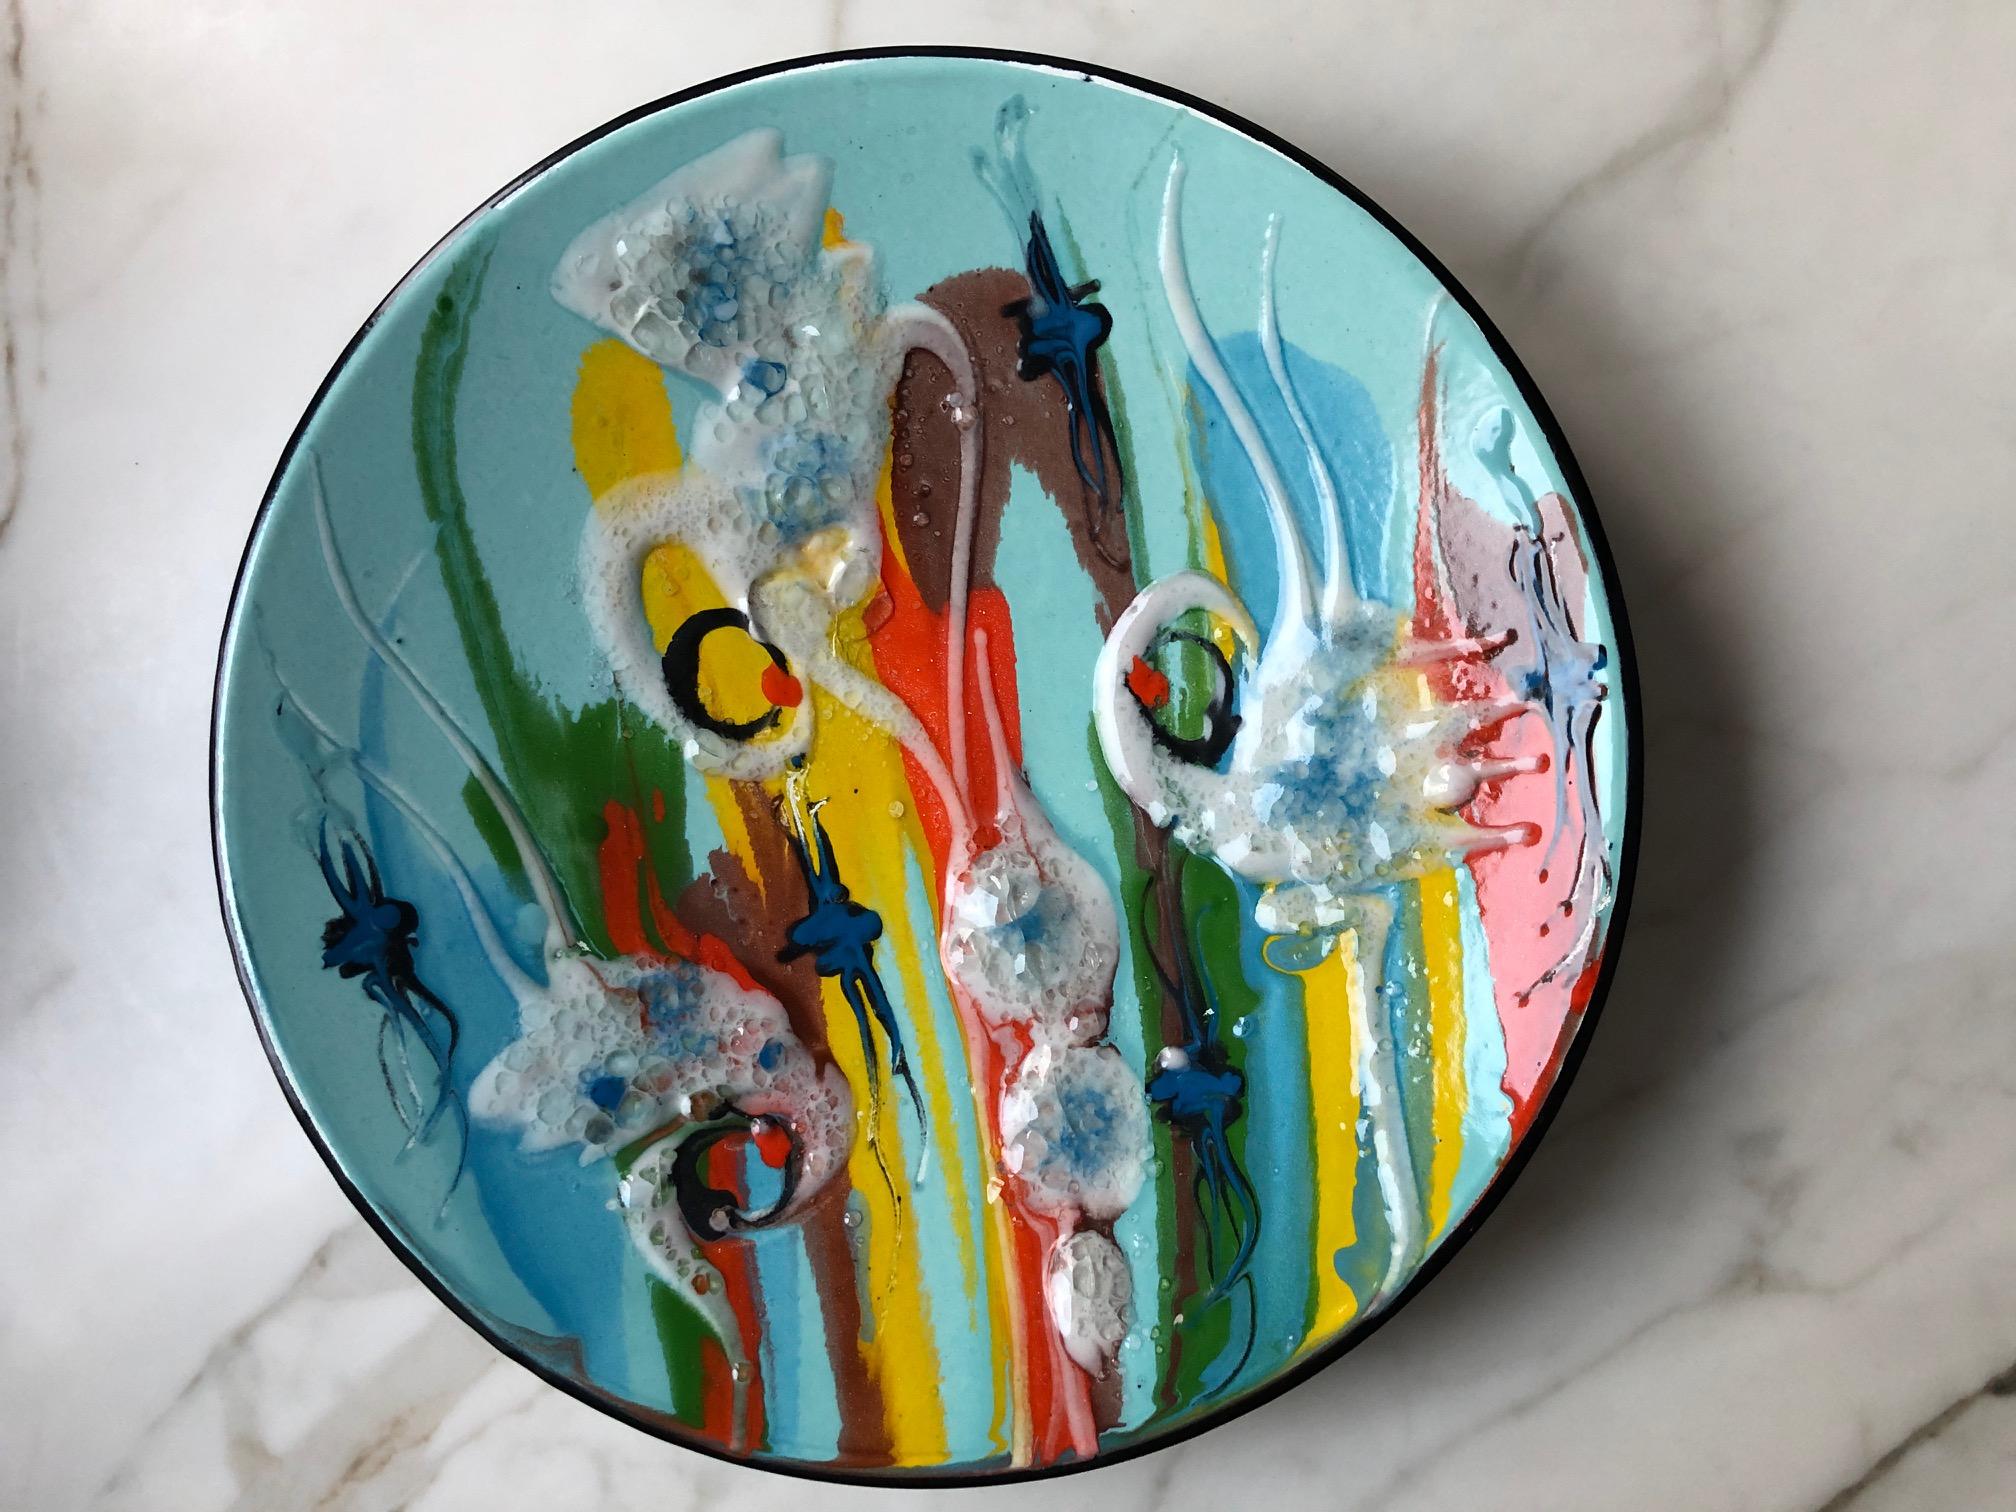 Mid-Century Modern Enamel Plate with an Abstract Pattern in Vivid Colors, Europe, 1960s For Sale